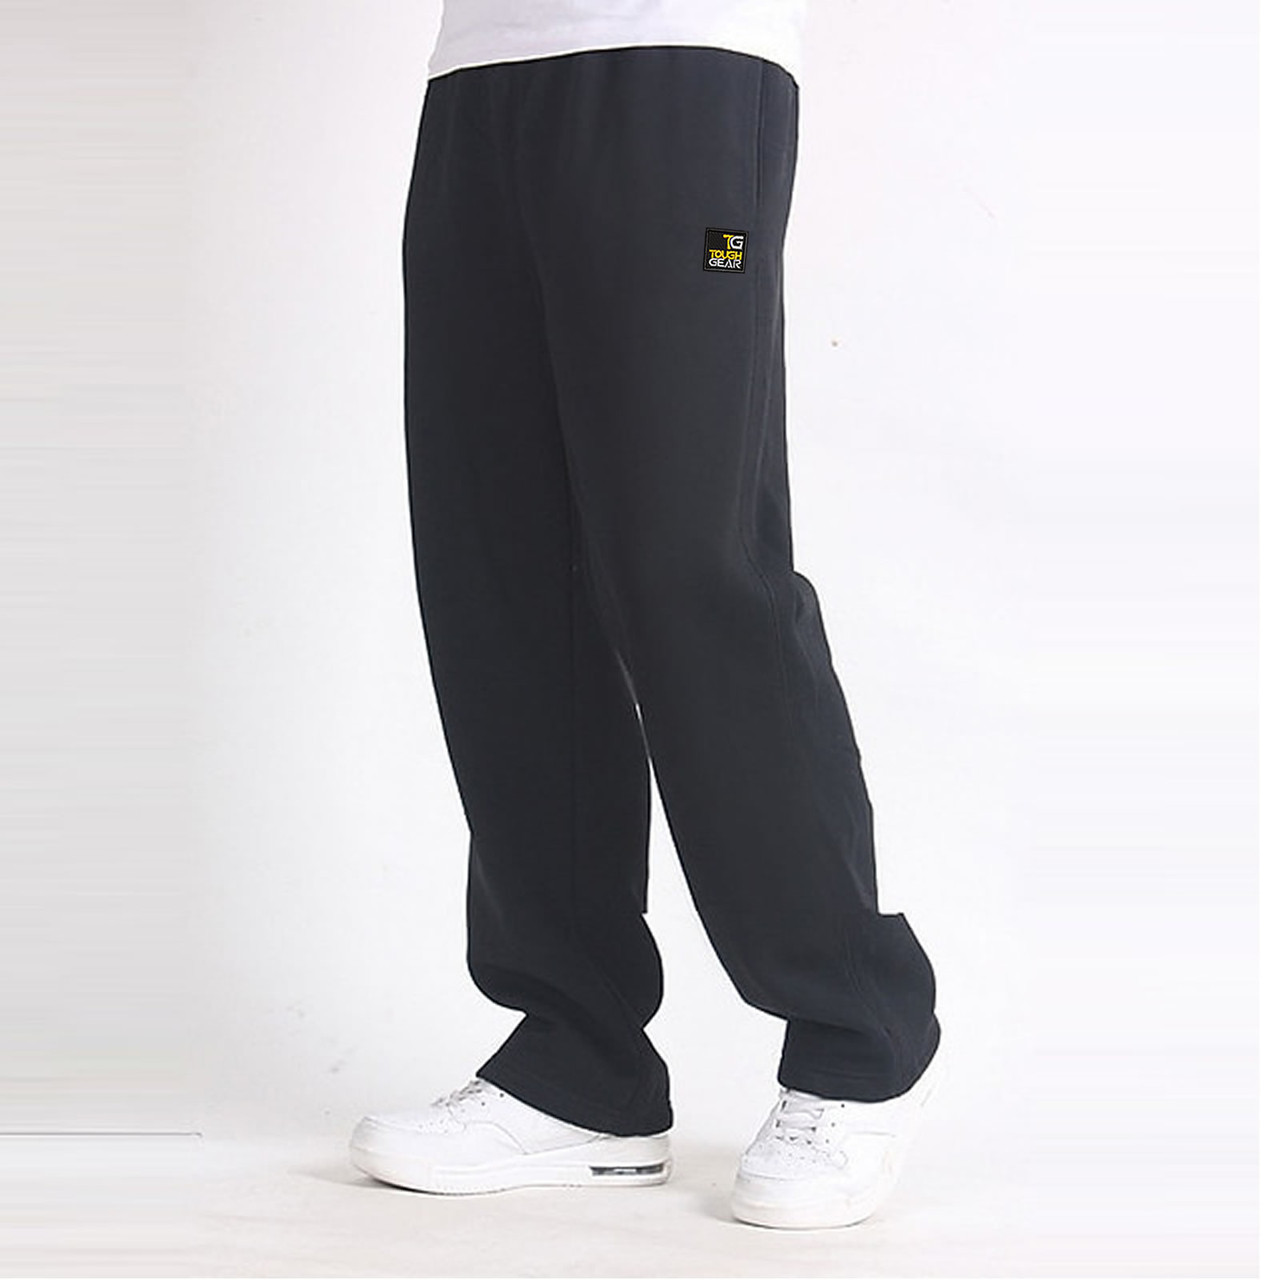 Tough Pocket Cuffed Joggers in Ivory